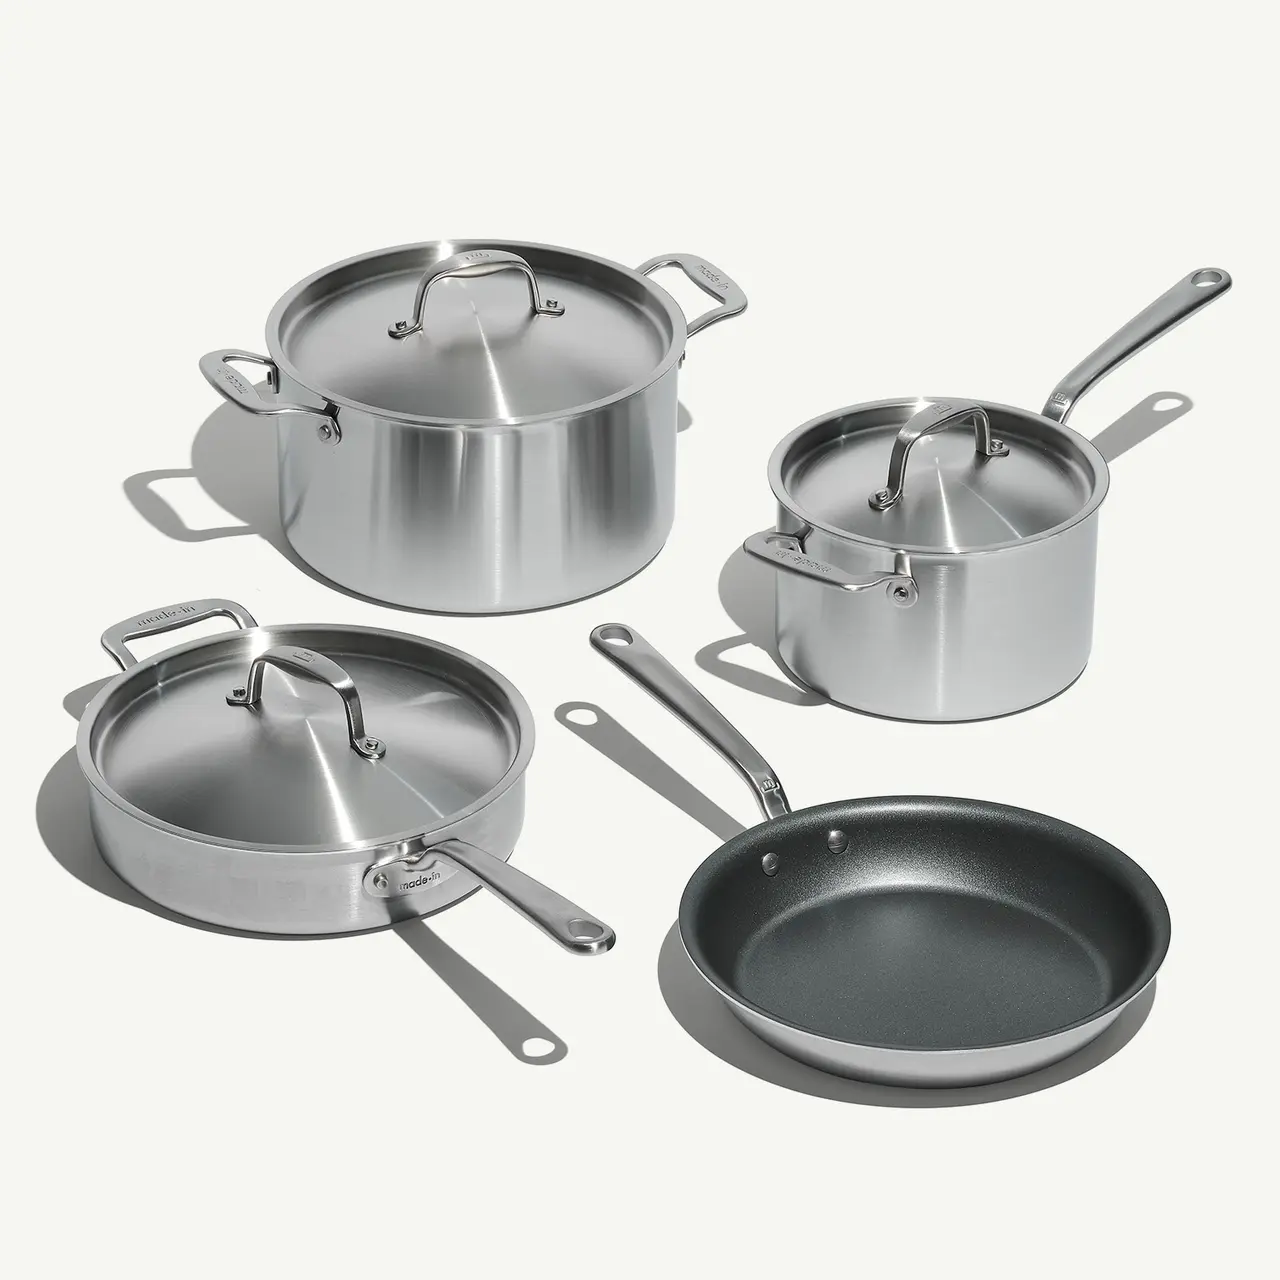 A set of stainless steel cookware with glass lids and one non-stick frying pan on a light background.